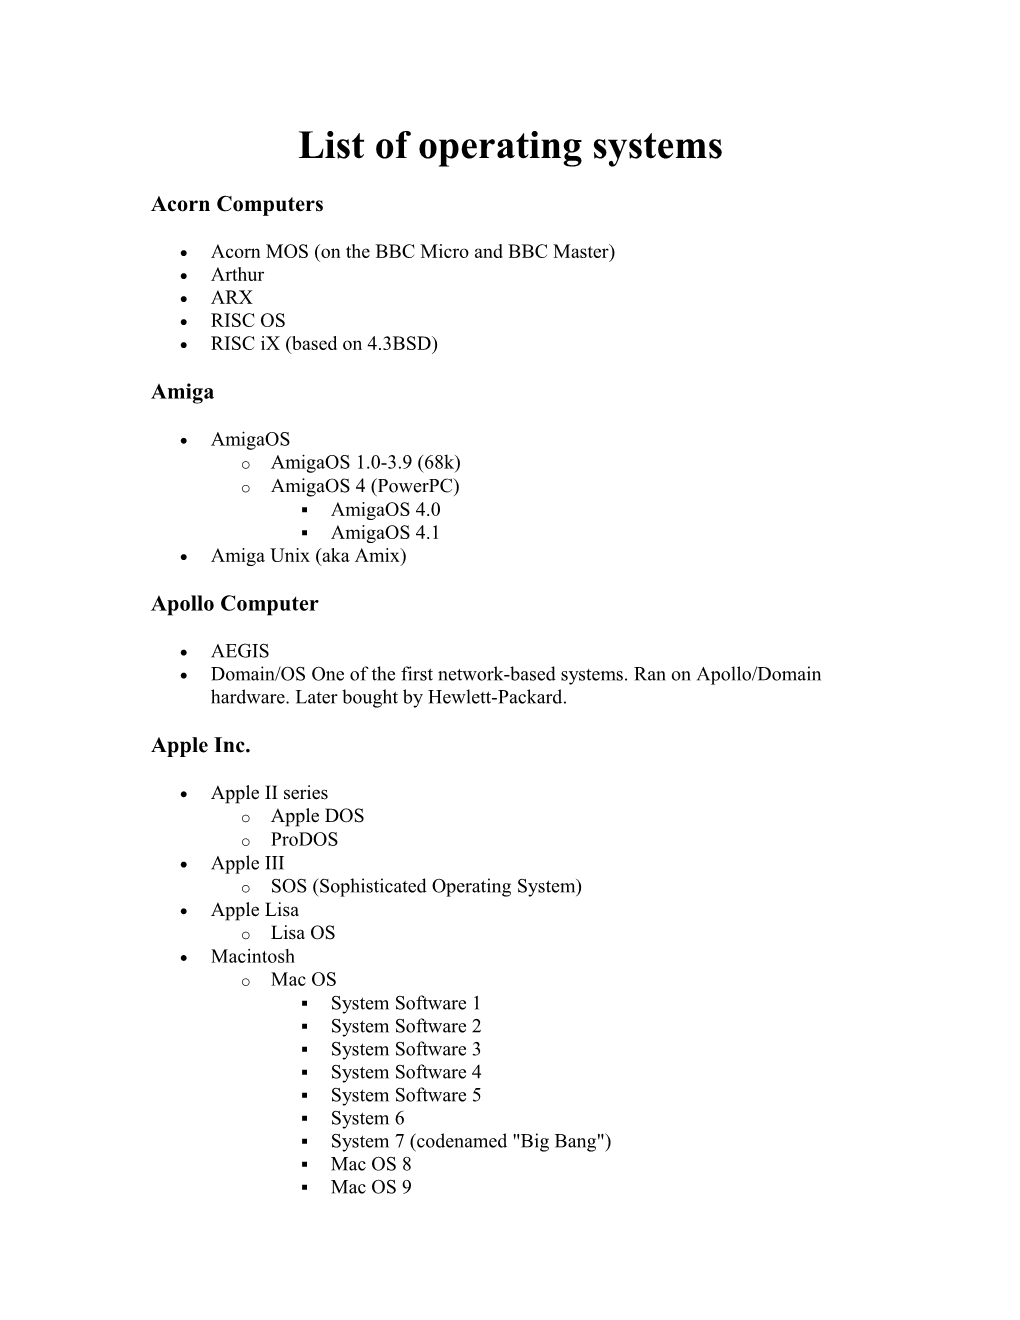 List of Operating Systems